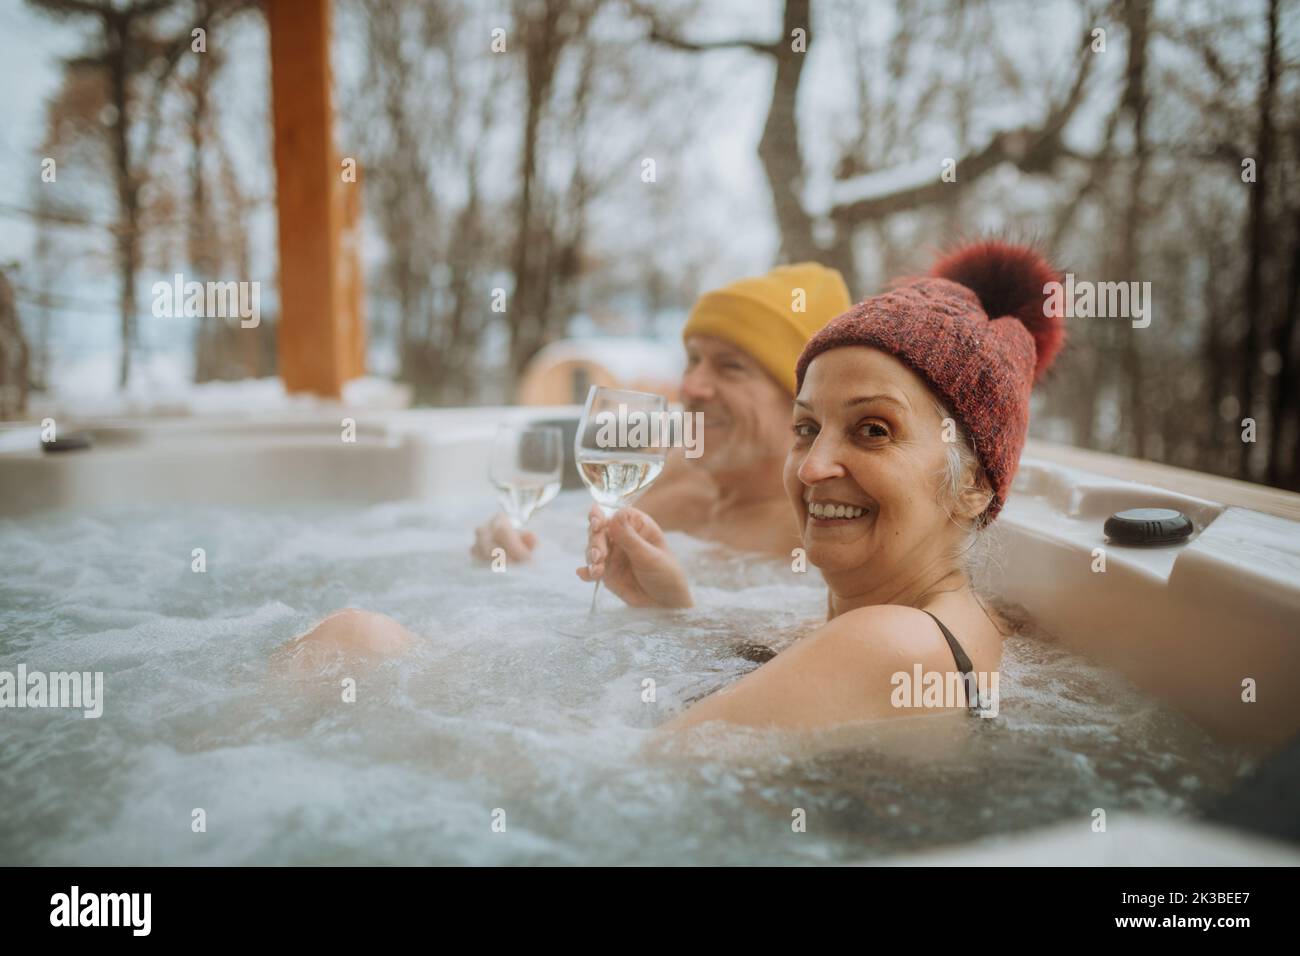 Senior couple in kintted cap enjoying together outdoor bathtub and enjoying glass of wine at their terrace during cold winter day. Stock Photo